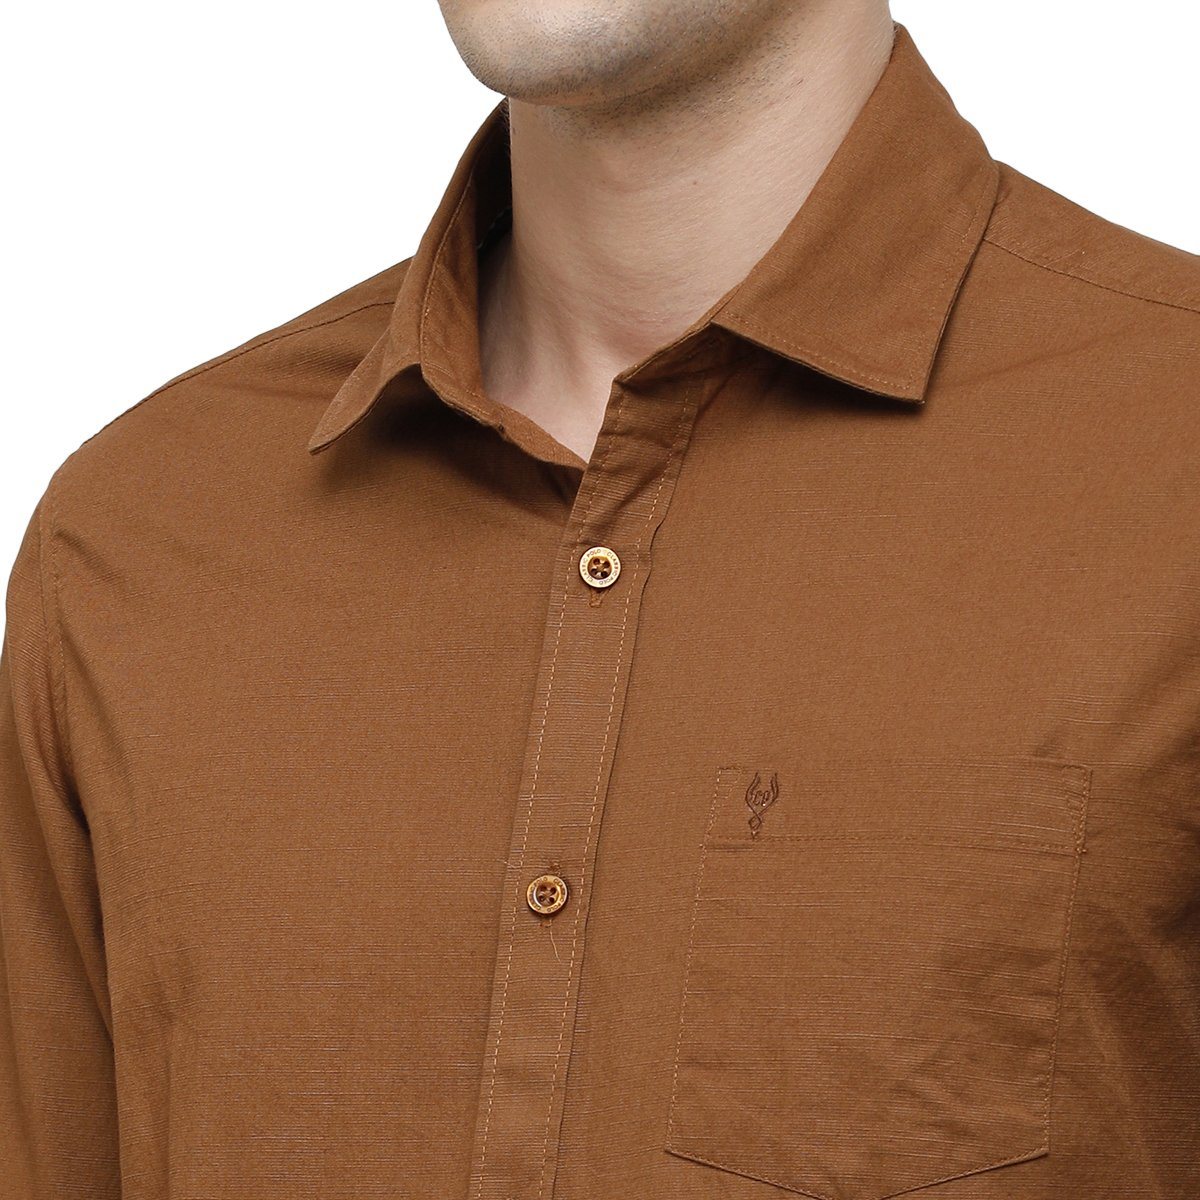 Classic Polo Mens Collar Neck Full Sleeve Brown Smart Fit 100% Cotton Woven Shirt SM1-69 G-FS-SLD-SF Shirts Classic Polo 